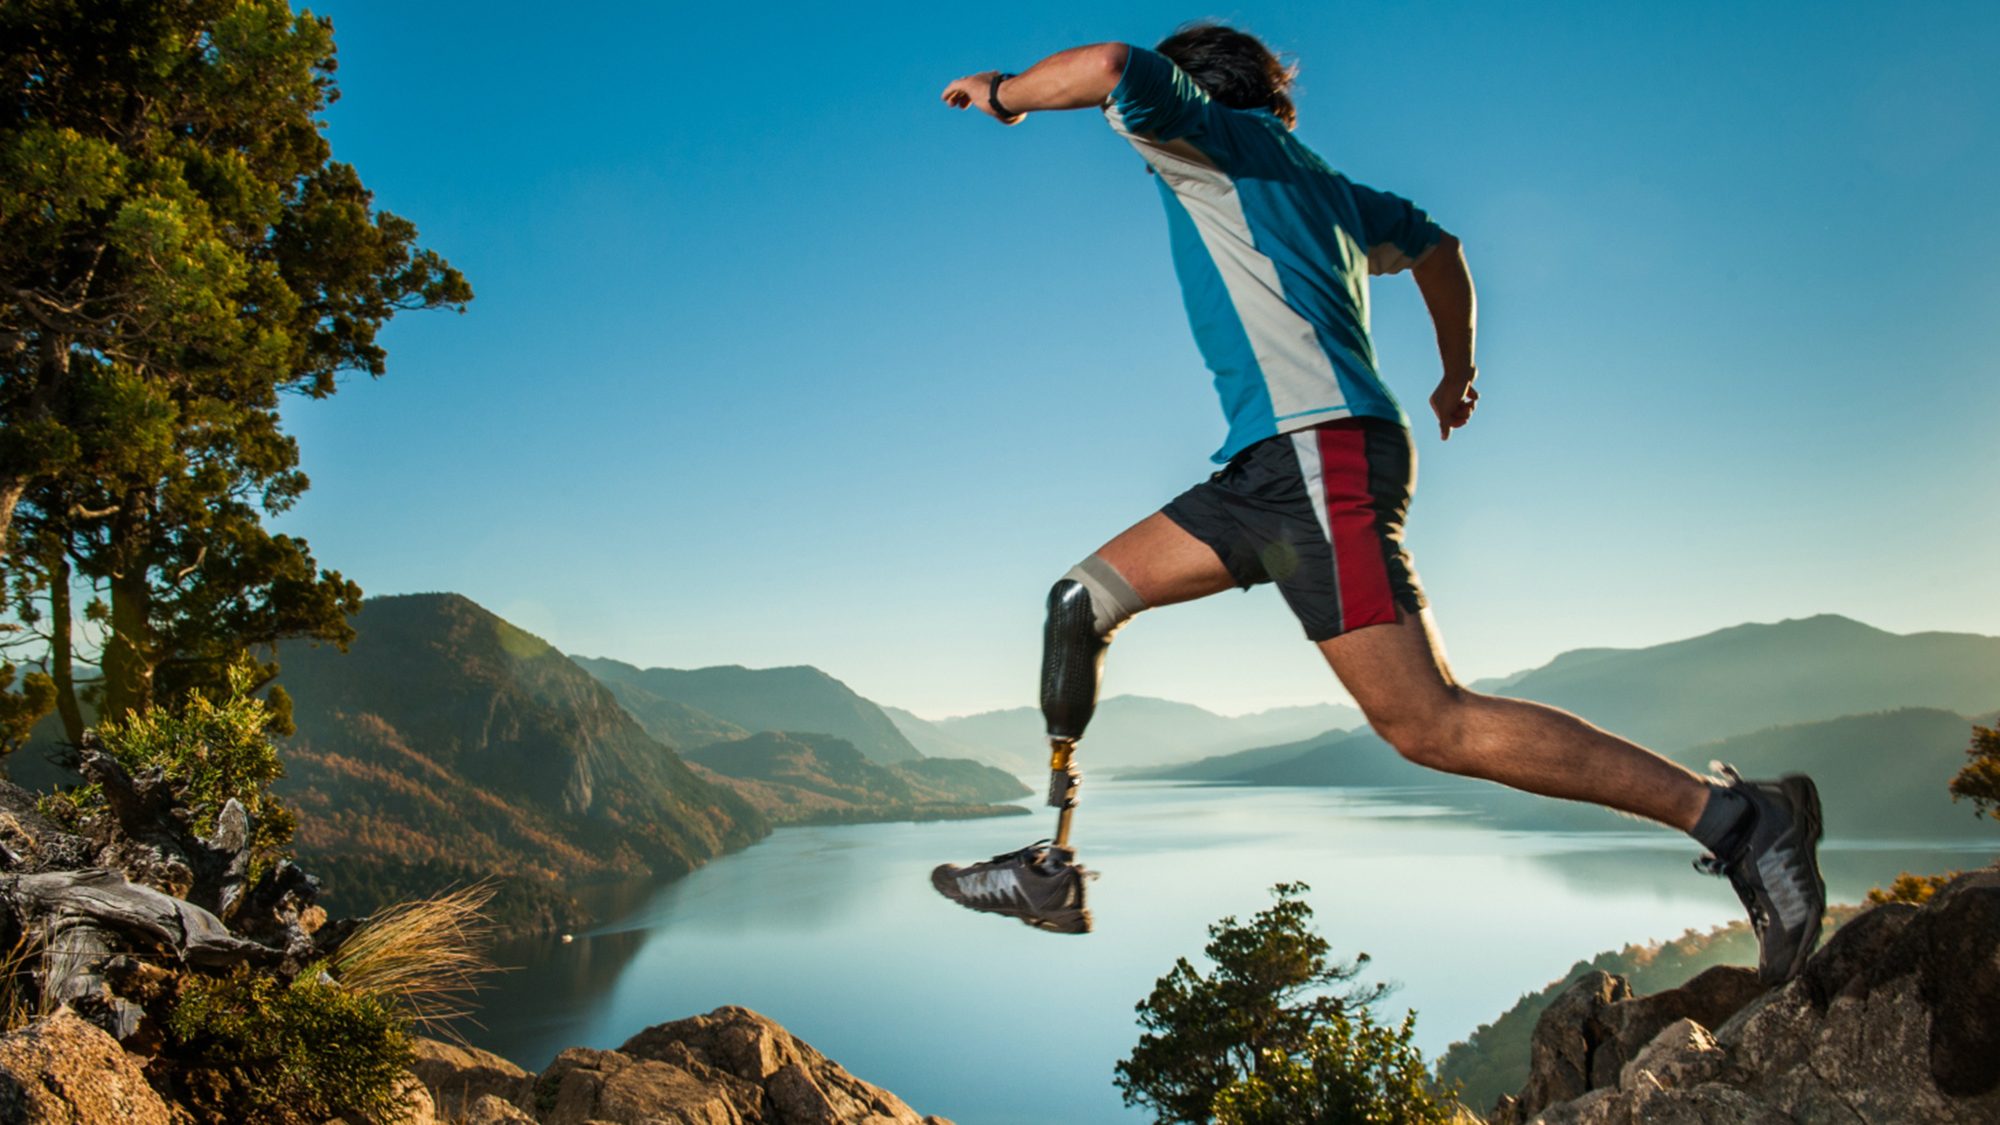 Man with a prosthetic leg running in a wild landscape.